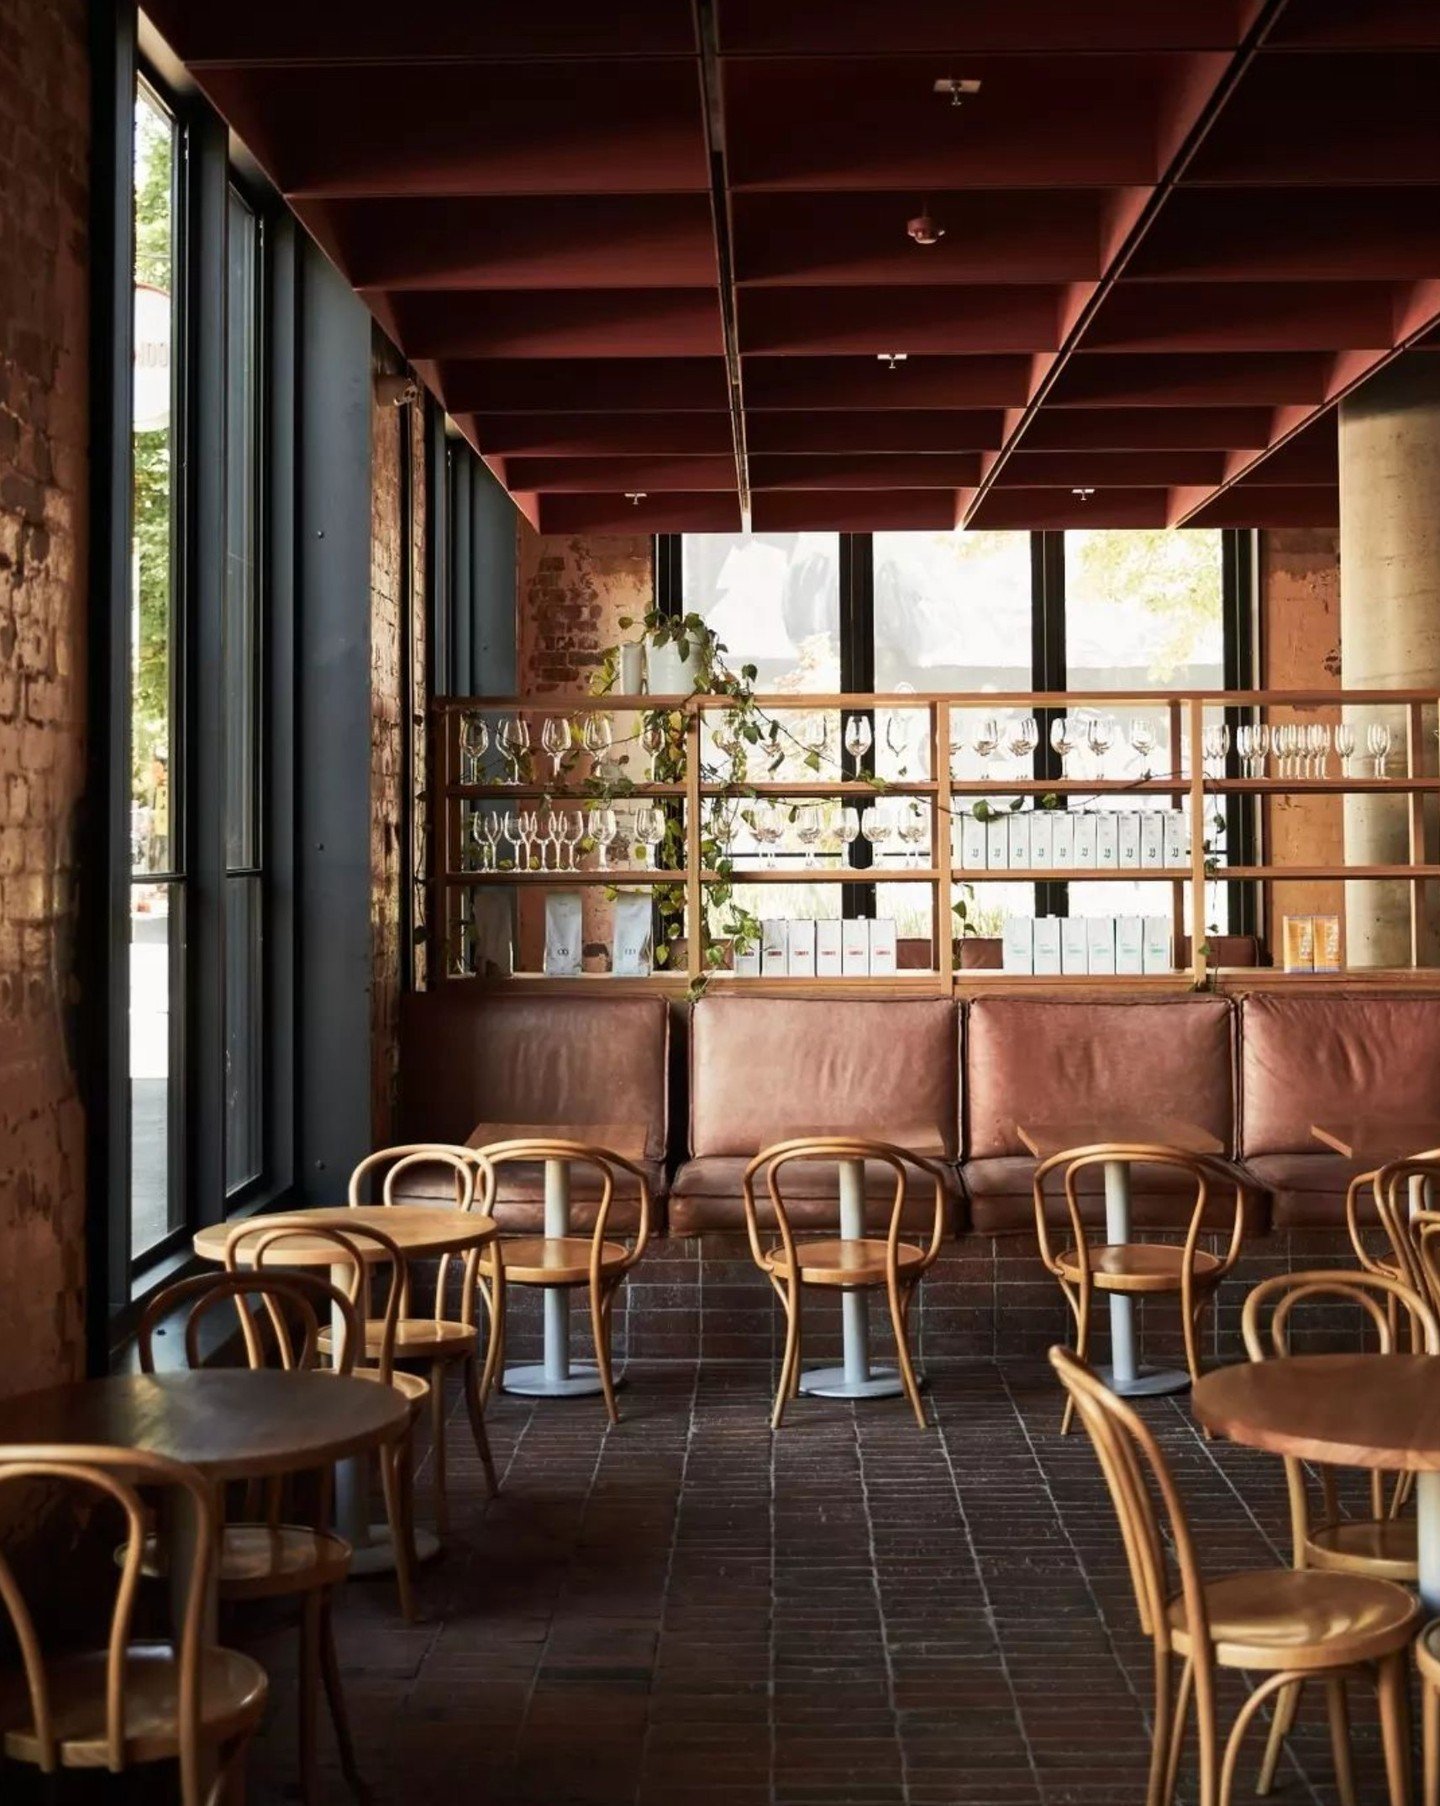 A project we love revisiting - especially when insufficiently caffeinated - is @bentwoodfitzroy,  which can be found tucked away in the leafy back streets of Fitzroy.

Our Krause Red Blue Rustic Paving Tiles perfectly balance the warm contemporary de